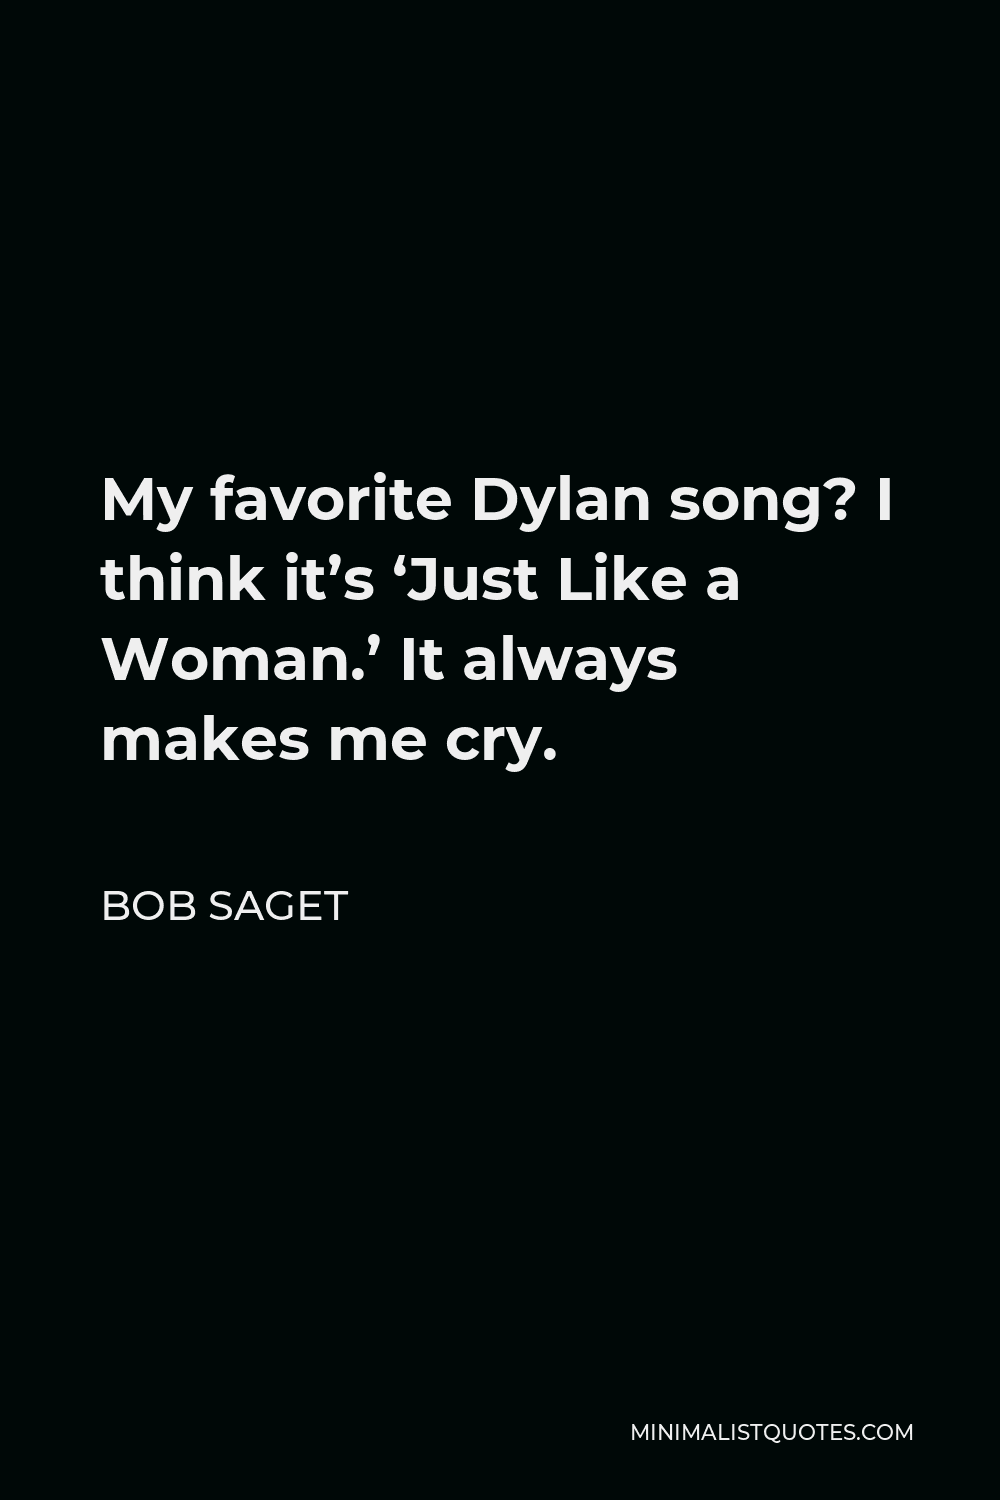 Bob Saget Quote - My favorite Dylan song? I think it’s ‘Just Like a Woman.’ It always makes me cry.